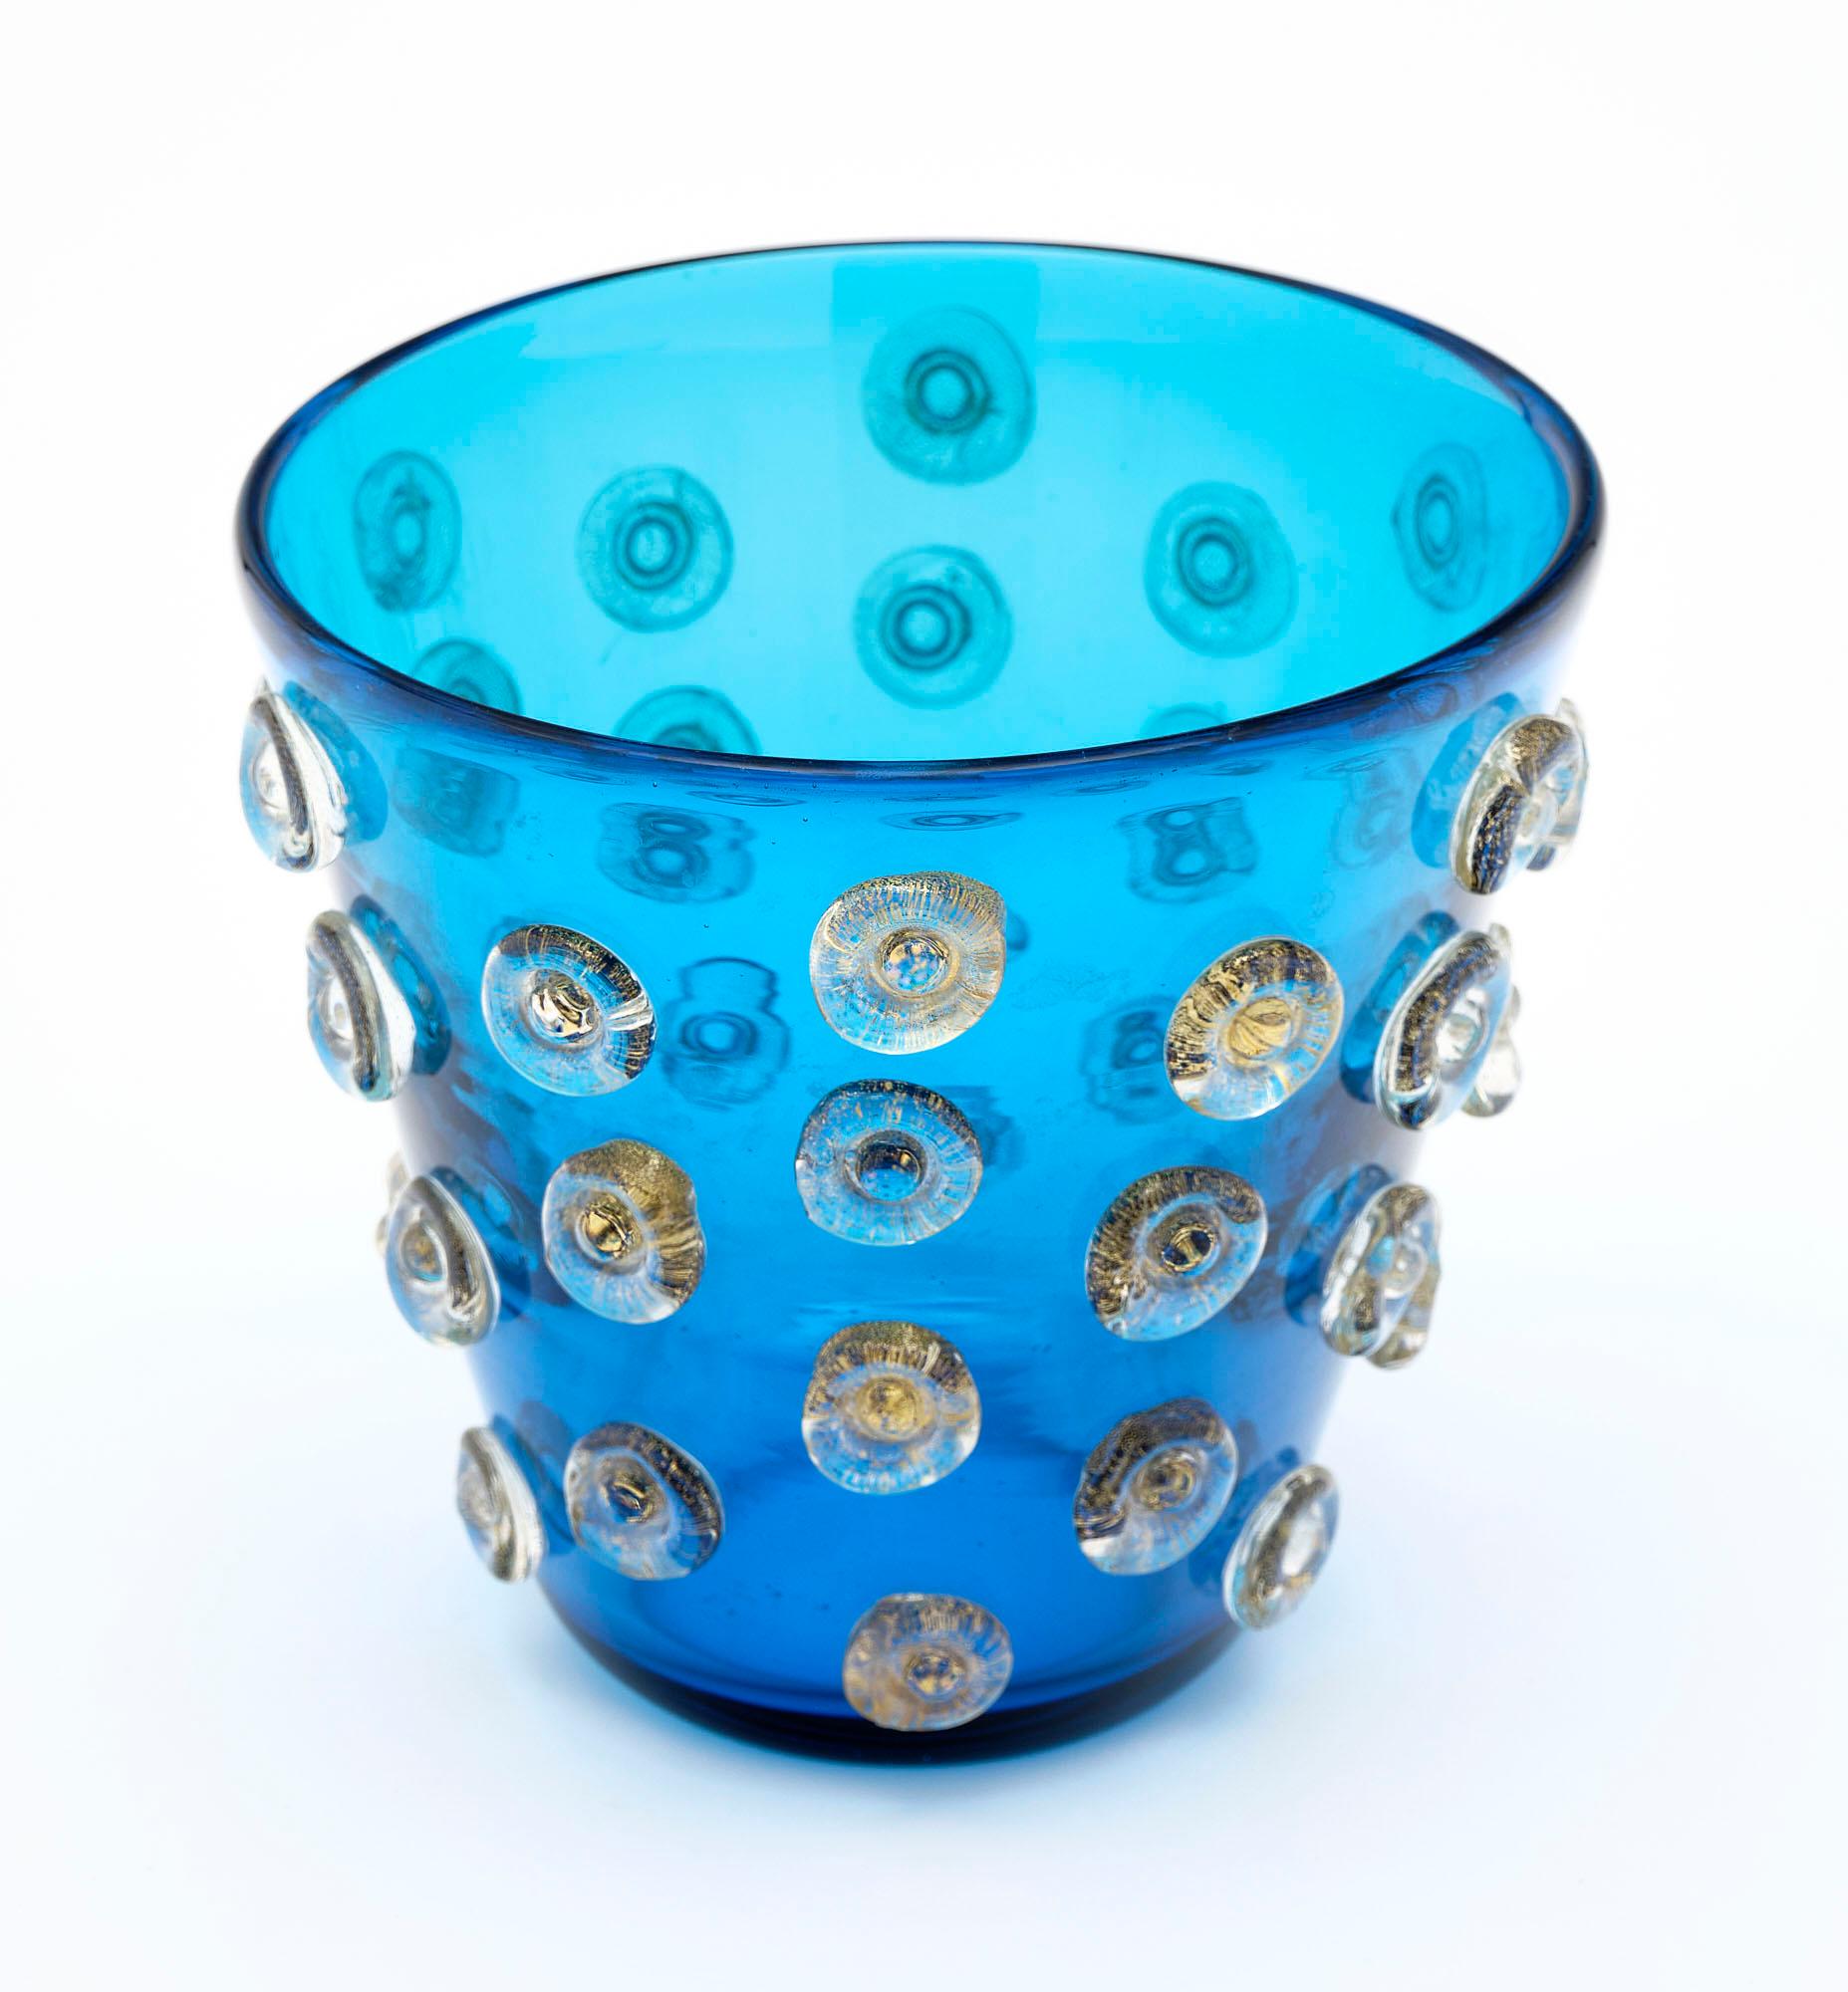 Pair of vases from the island of Murano made of aqua blue hand-blown glass with 24 carat fused glass “buttons”.